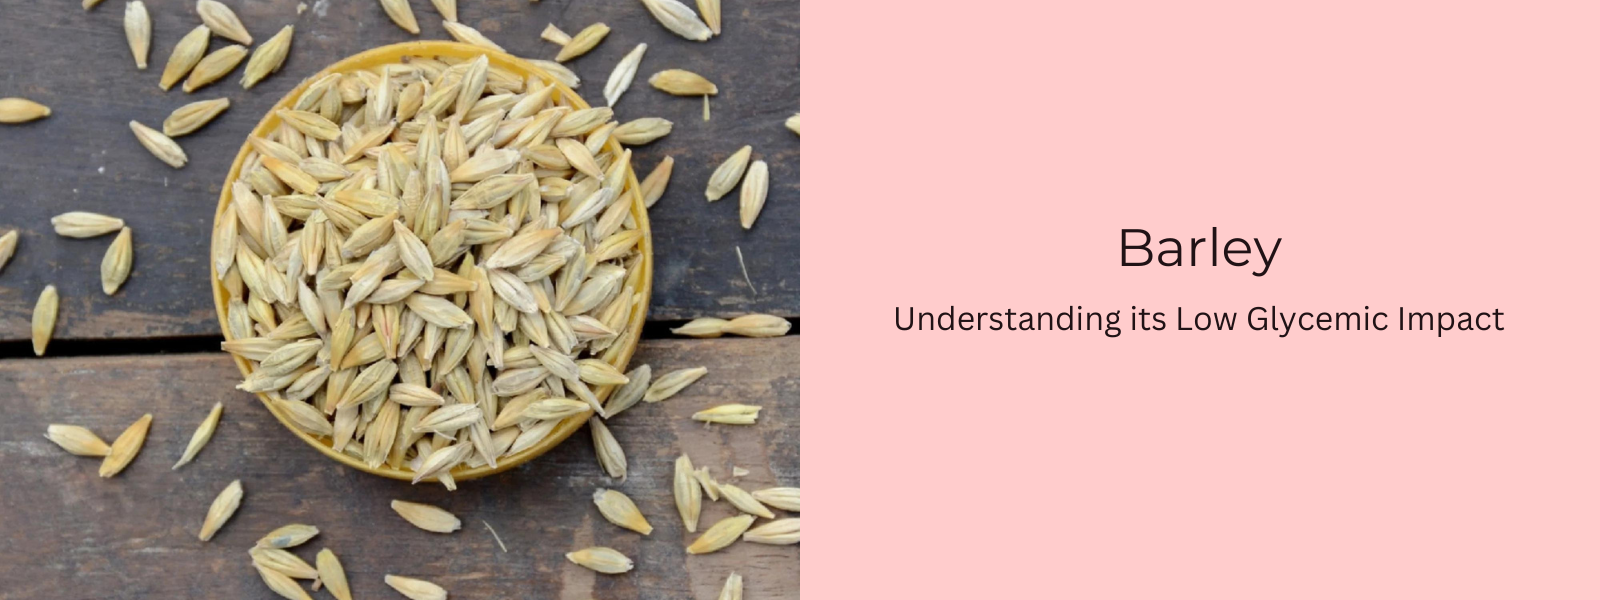 Barley Benefits: Understanding its Low Glycemic Impact